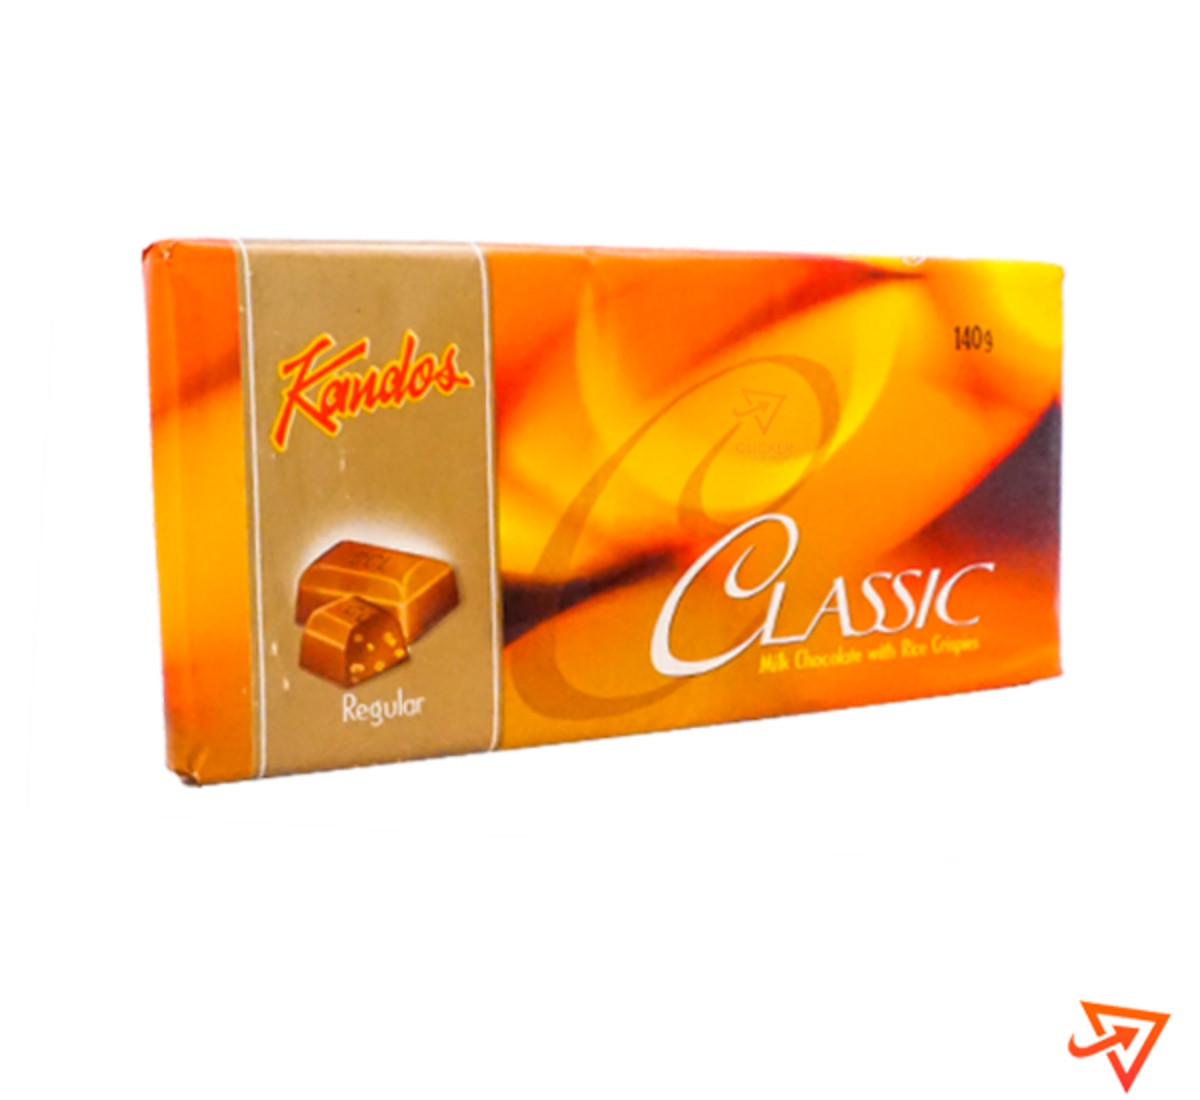 Clicker product 140g Kandos Classicmilk chocolate with rice Crispies Regular Flavour 1158